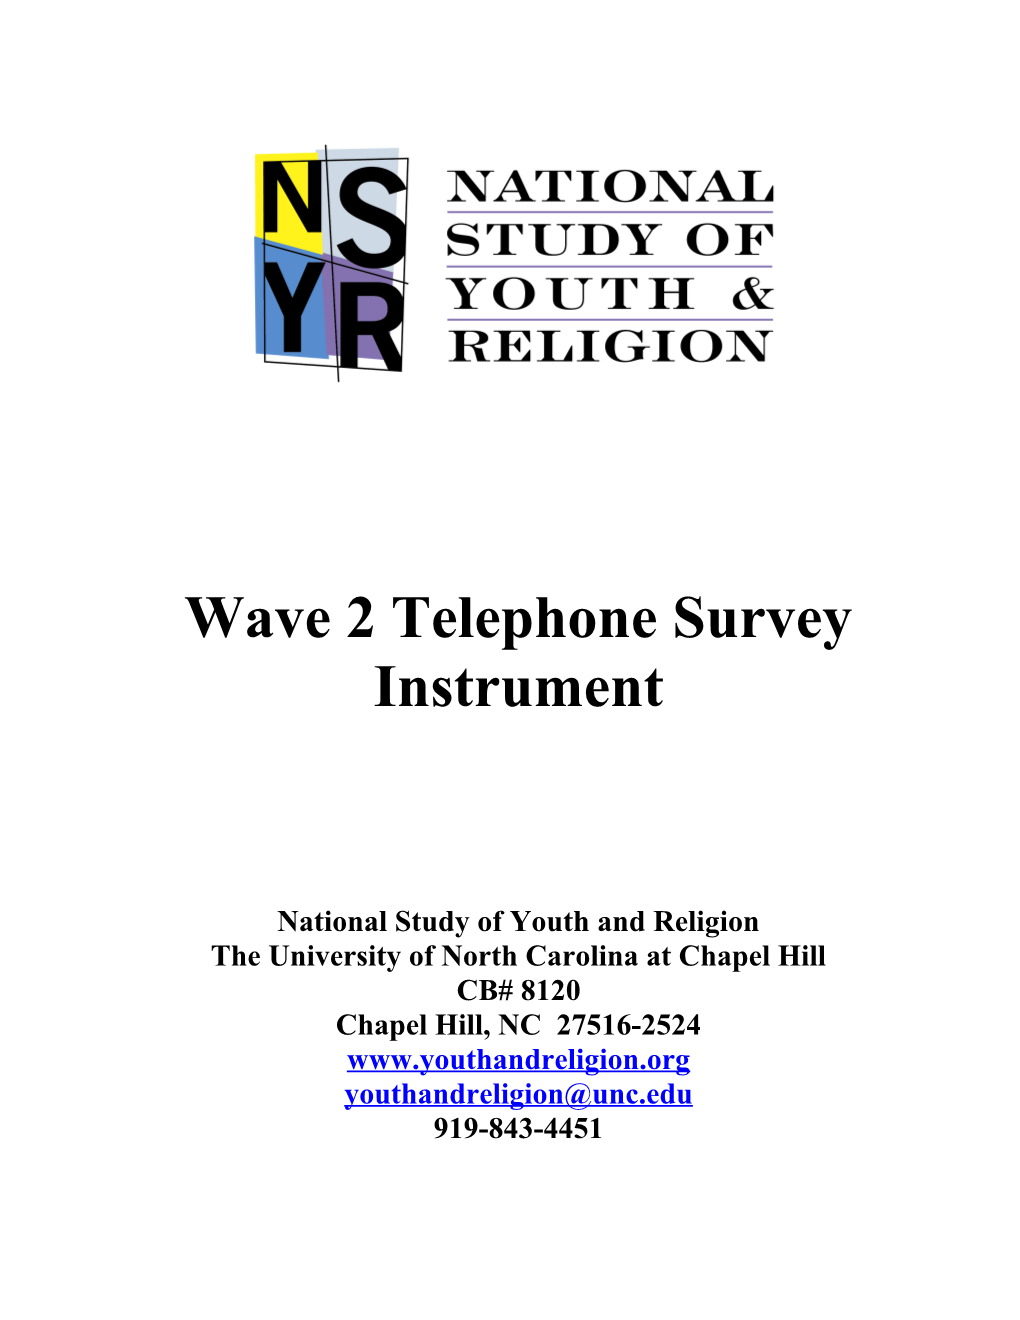 National Study of Youth and Religion, Wave 2 Telephone Survey